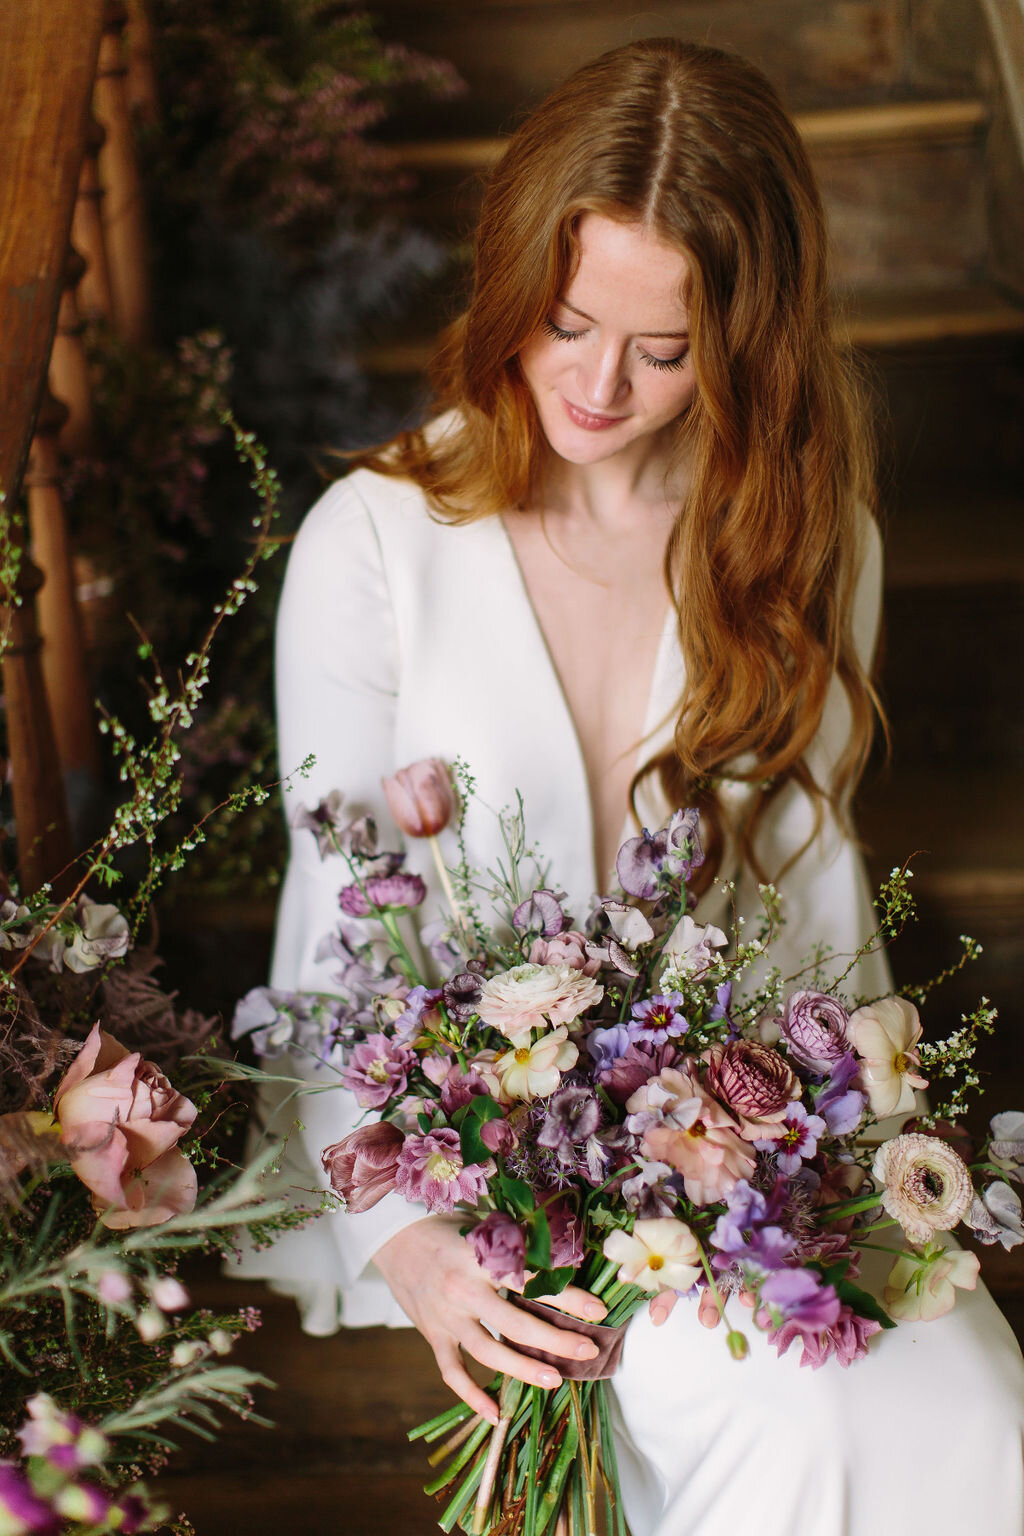 Whimsical and organic purple bridal bouquet with delicate spring flowers like spirea, ranunculus, sweet peas, and tulips. Nashville wedding florist.